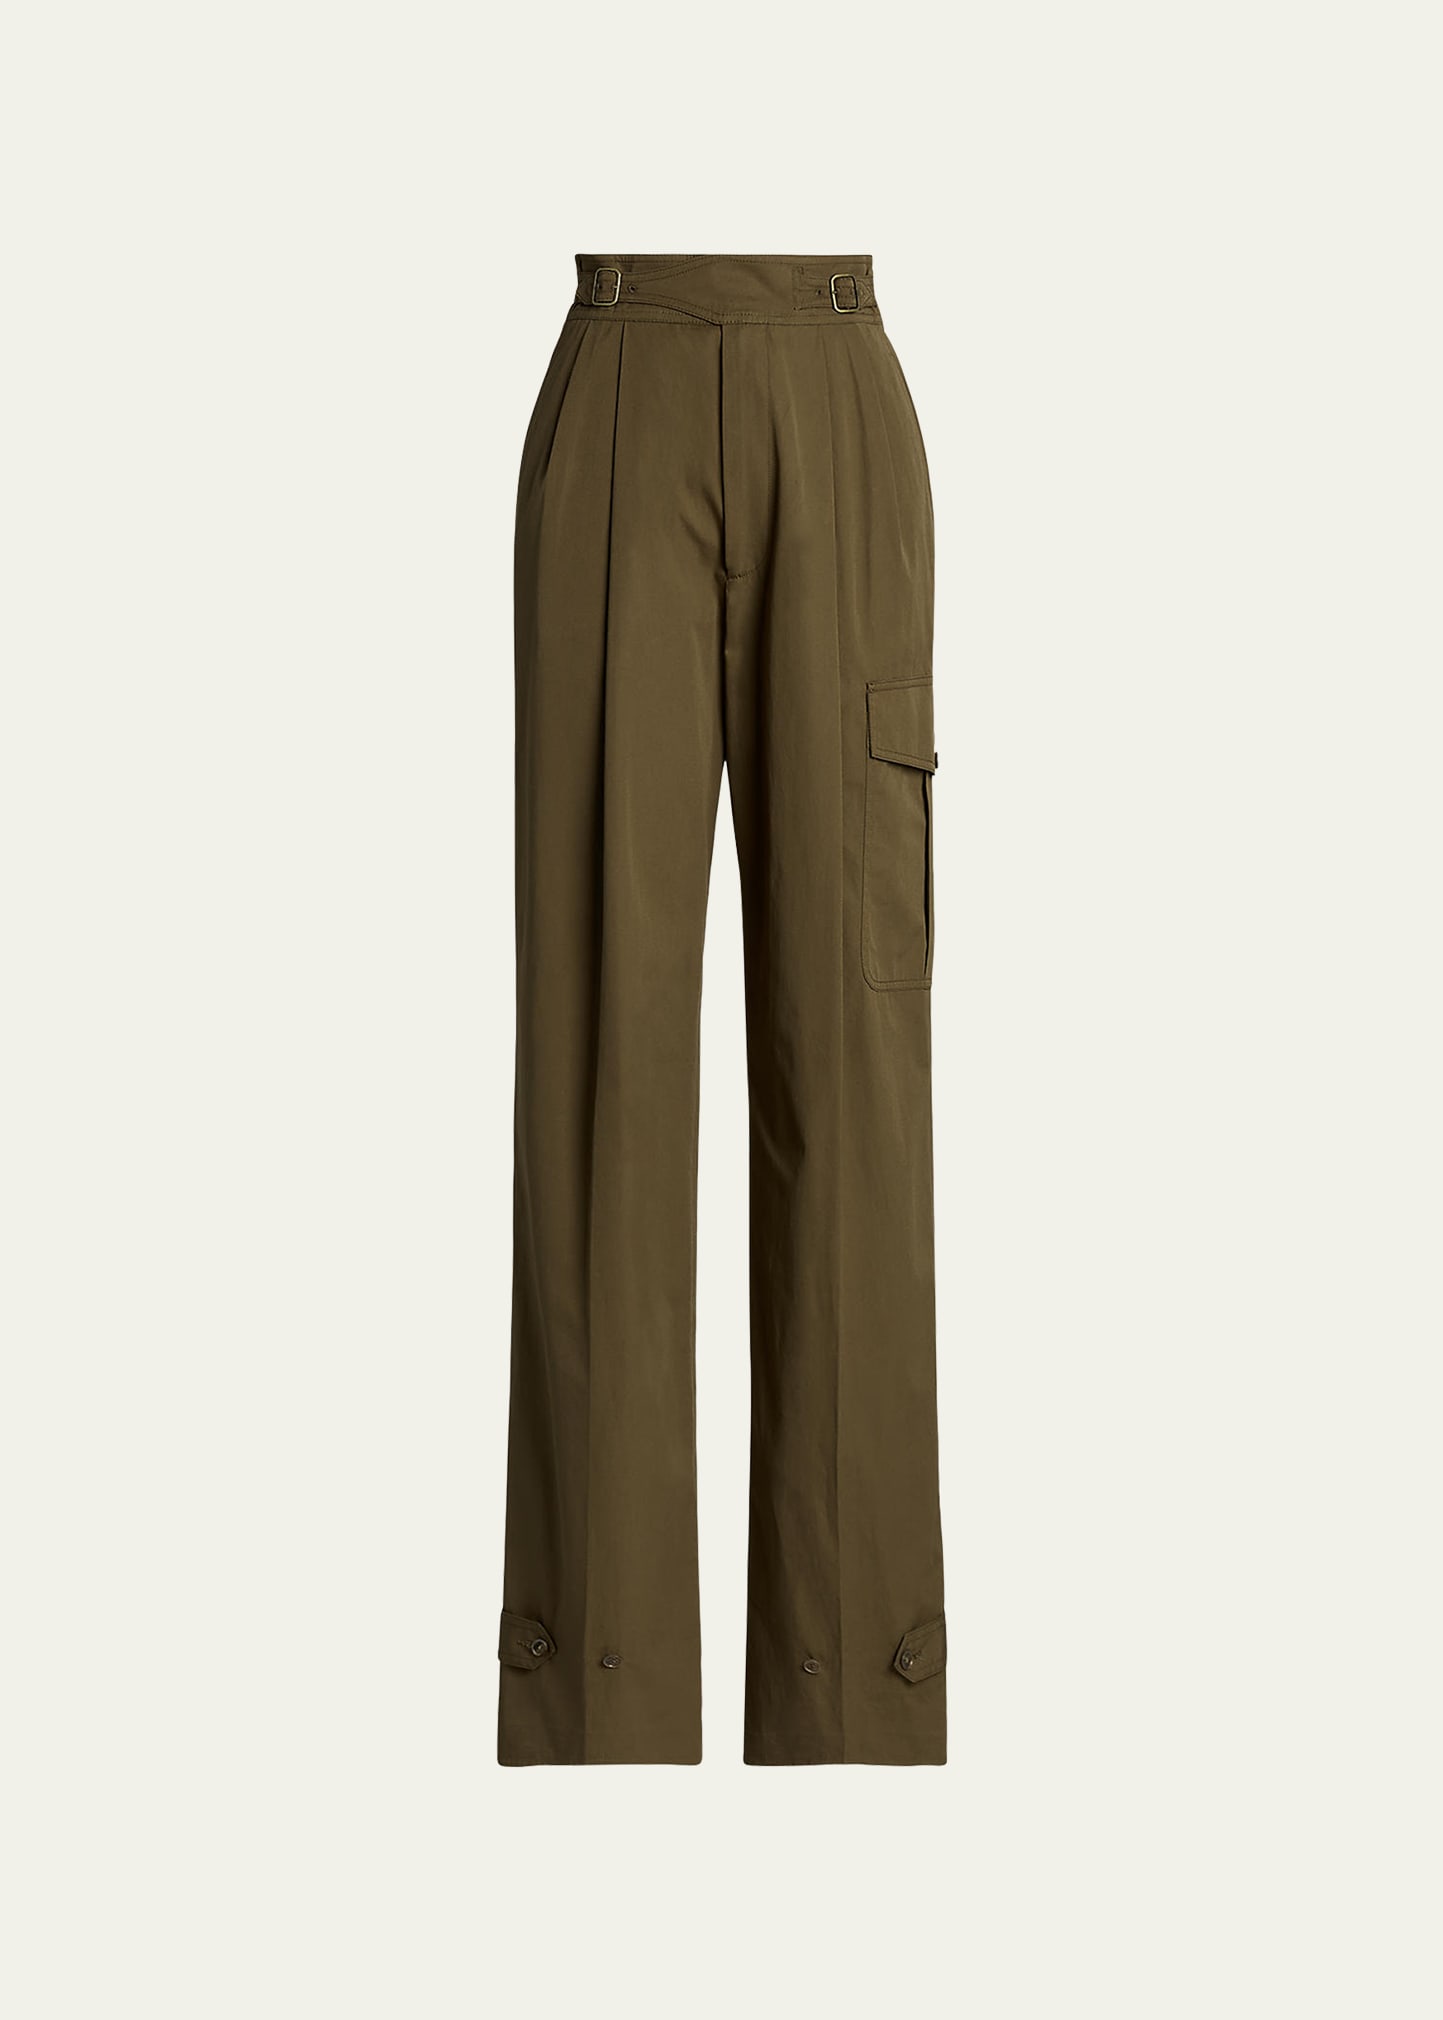 Anniston Pleated Belted-Cuff Pants